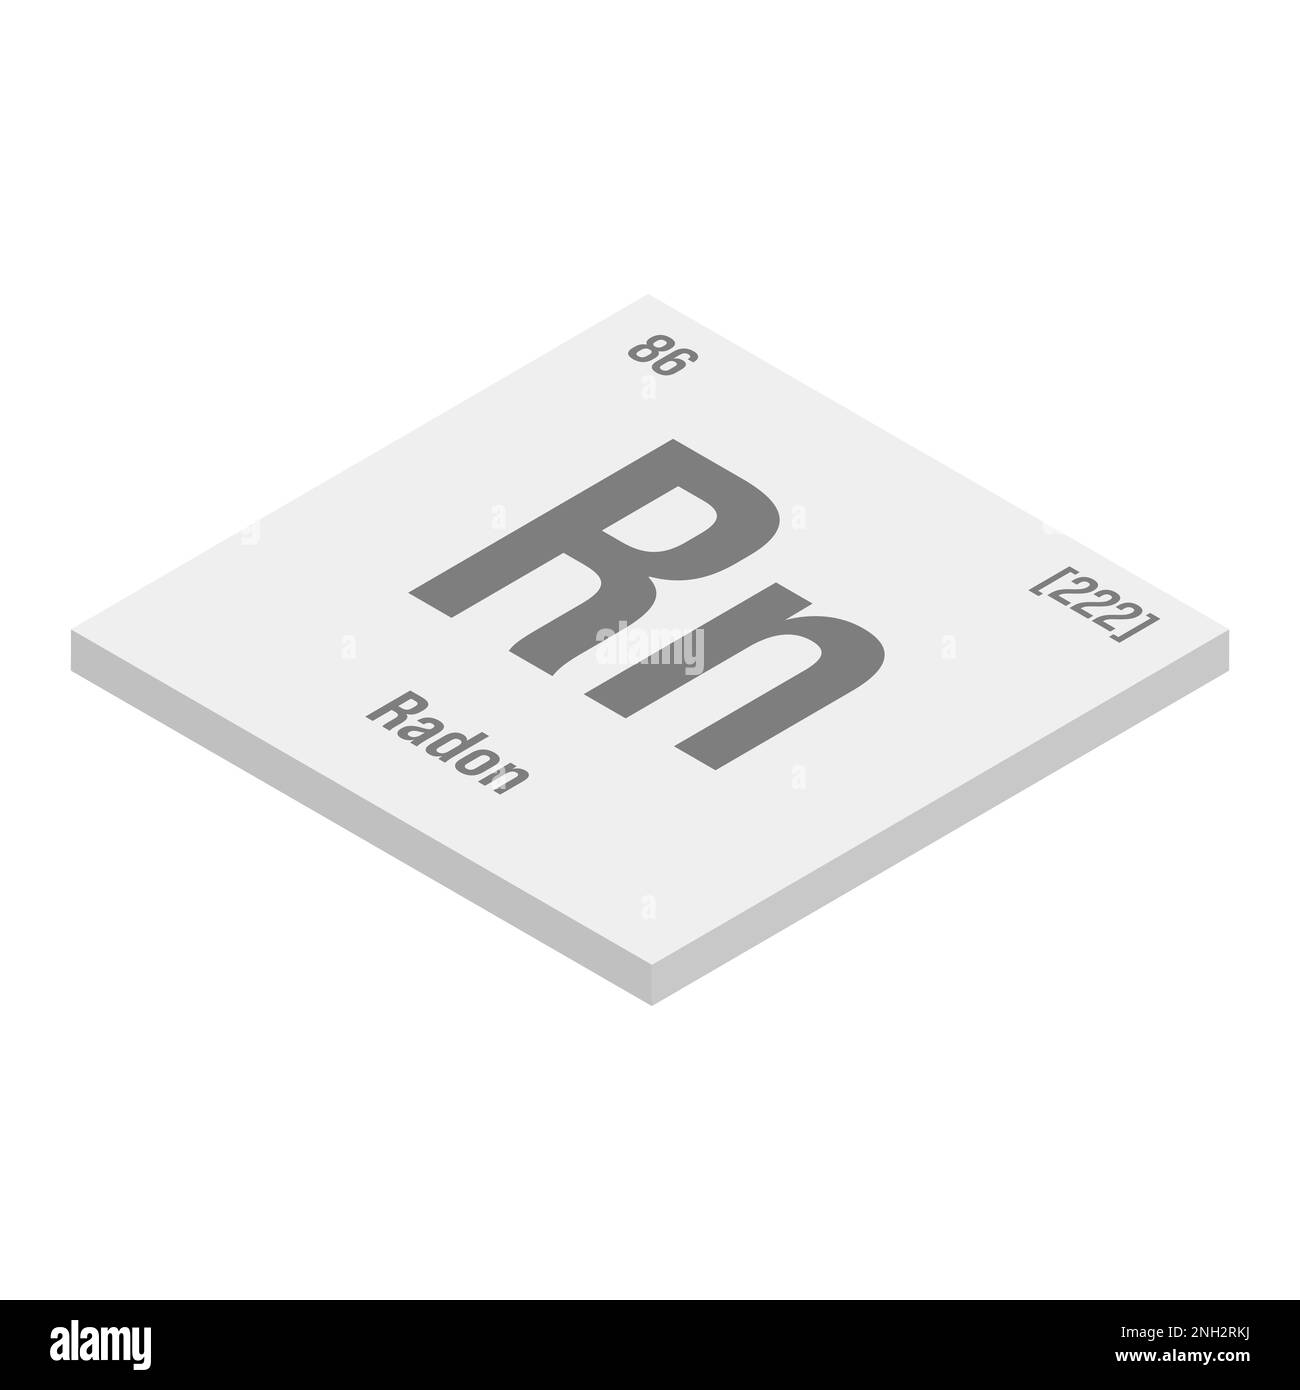 Radon, Rn, gray 3D isometric illustration of periodic table element with name, symbol, atomic number and weight. Inert gas with radioactive properties, used in scientific research and as a tracer in certain types of experiments. Stock Vector